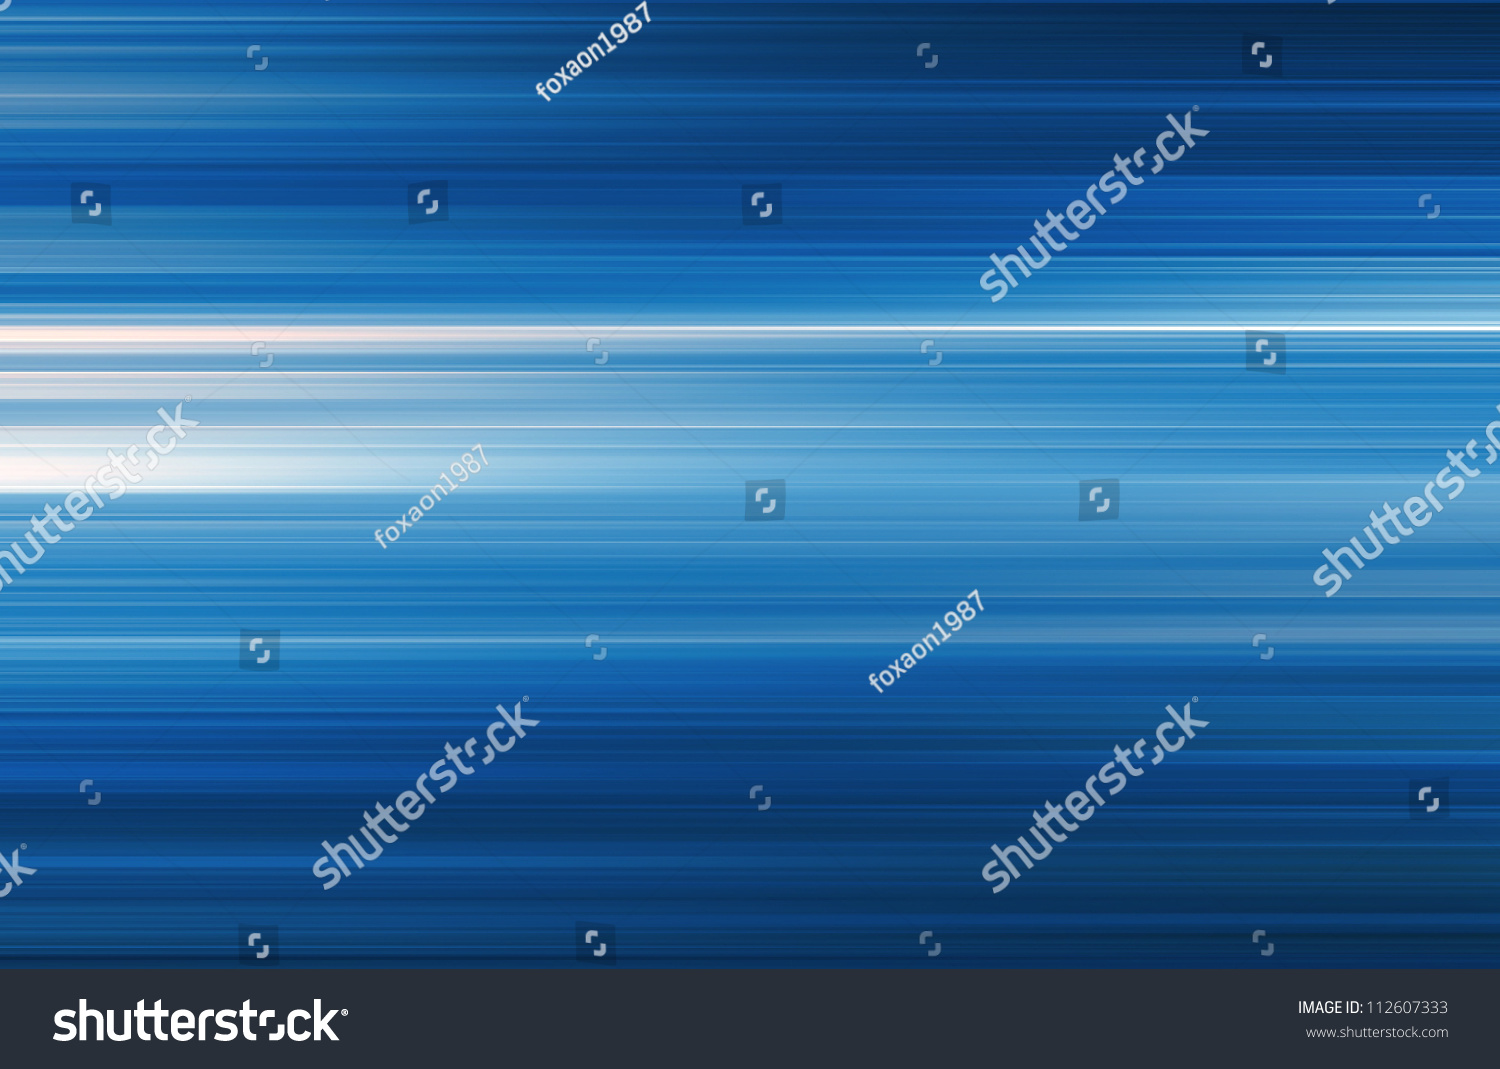 Blue Lines Background Stock Photo 112607333 : Shutterstock